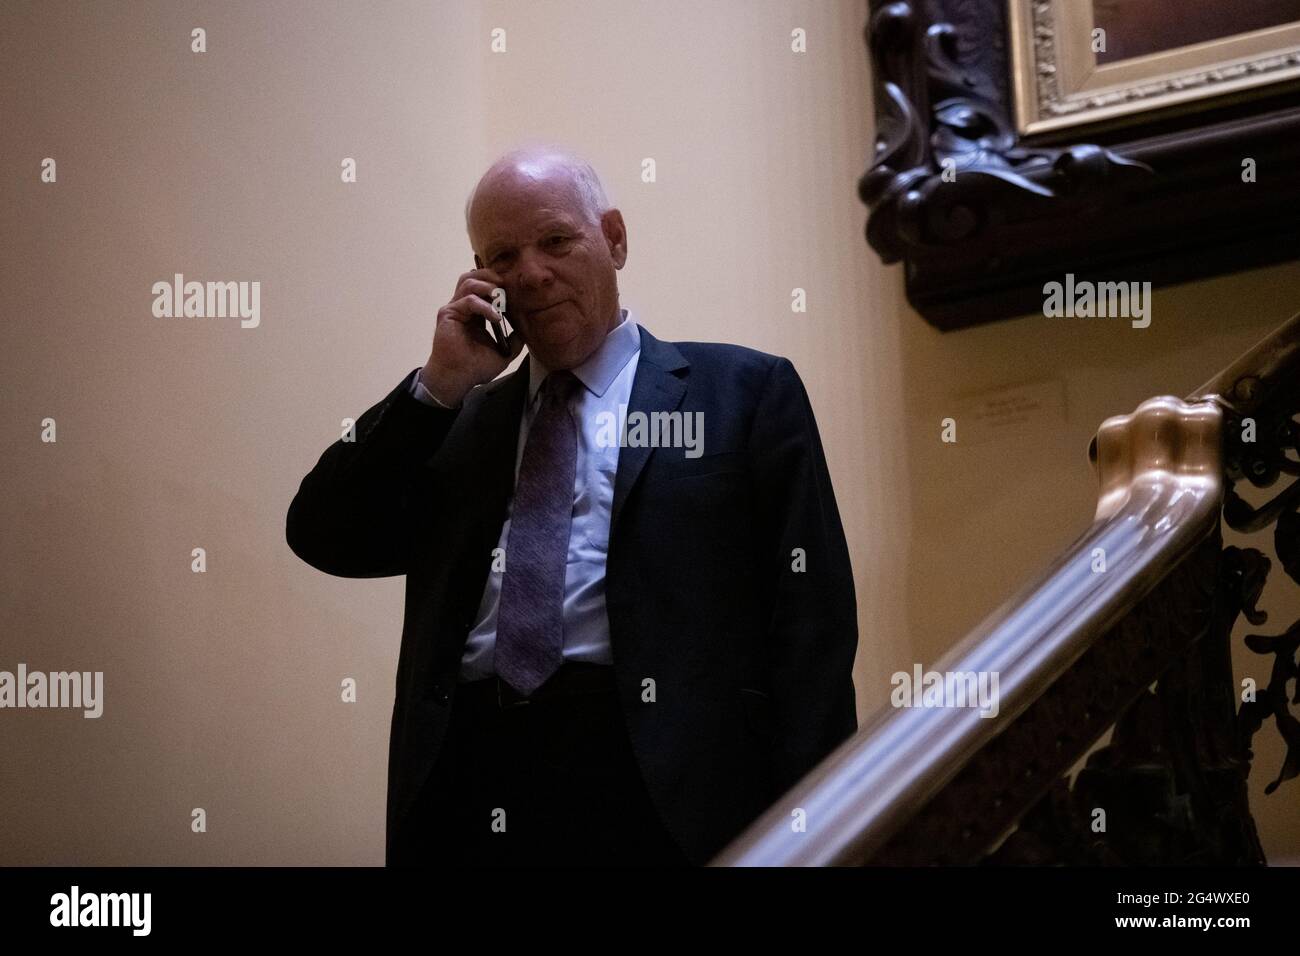 Washington, USA. 23rd June, 2021. Senator Ben Cardin (D-MD) talks on the phone, at the U.S. Capitol, in Washington, DC, on Wednesday, June 23, 2021. Last night Senate Republicans filibustered a voting rights bill as bipartisan negotiations over infrastructure legislation grind on with little apparent progress building a package to beat the 60-vote filibuster threshold. (Graeme Sloan/Sipa USA) Credit: Sipa USA/Alamy Live News Stock Photo